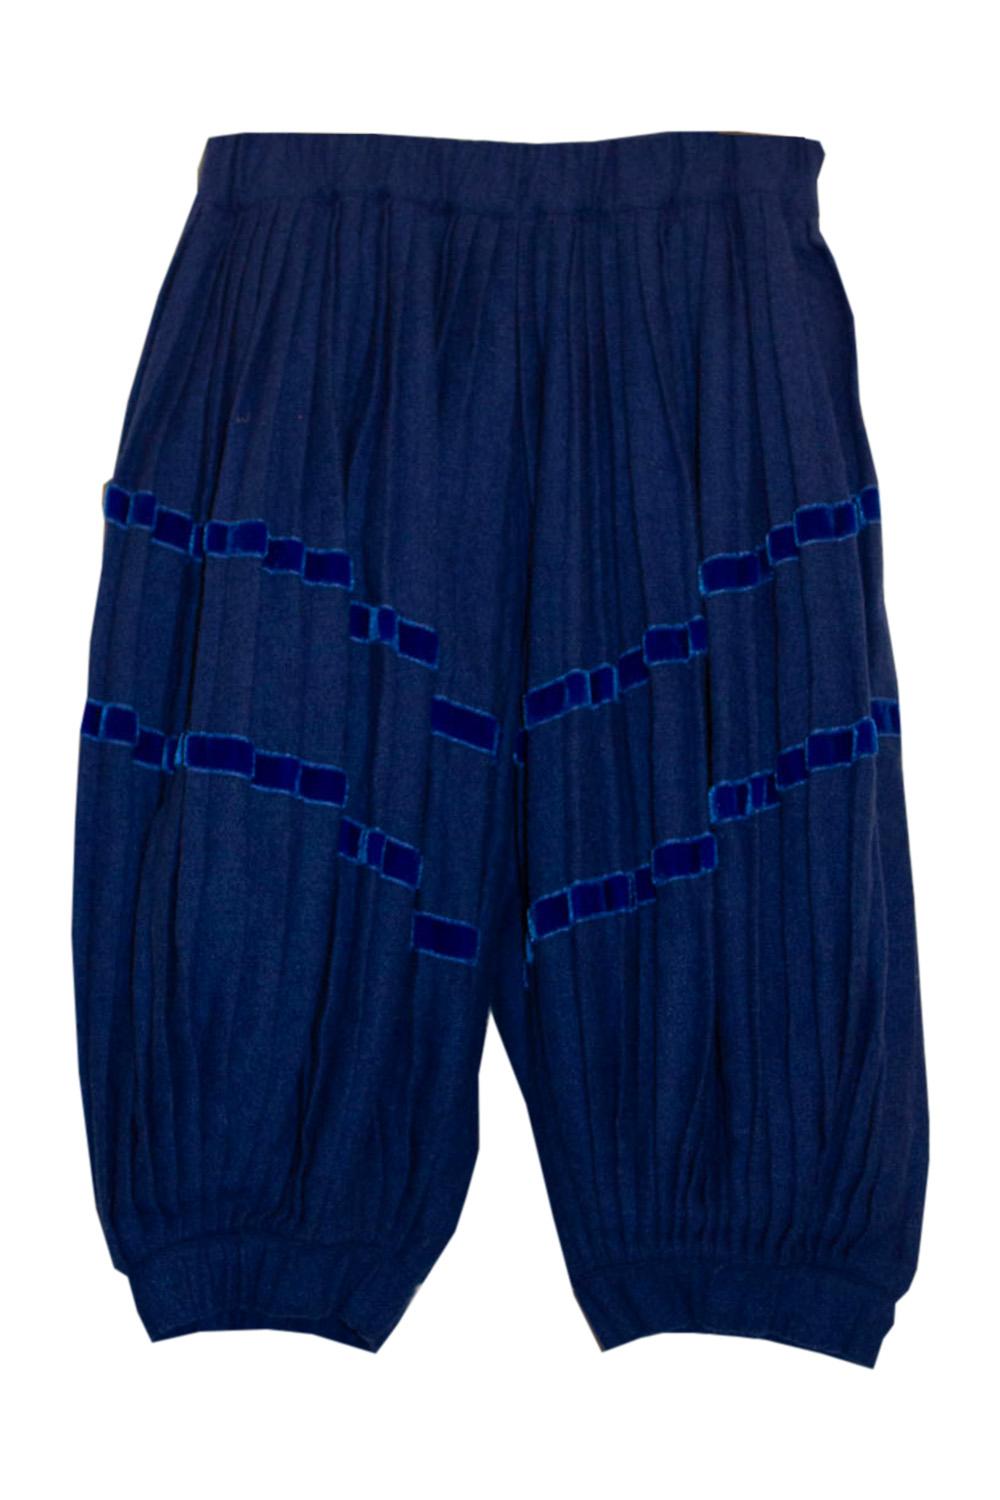 Vintage Kenzo Blue Pleated Knickerbockers/Shorts For Sale 1